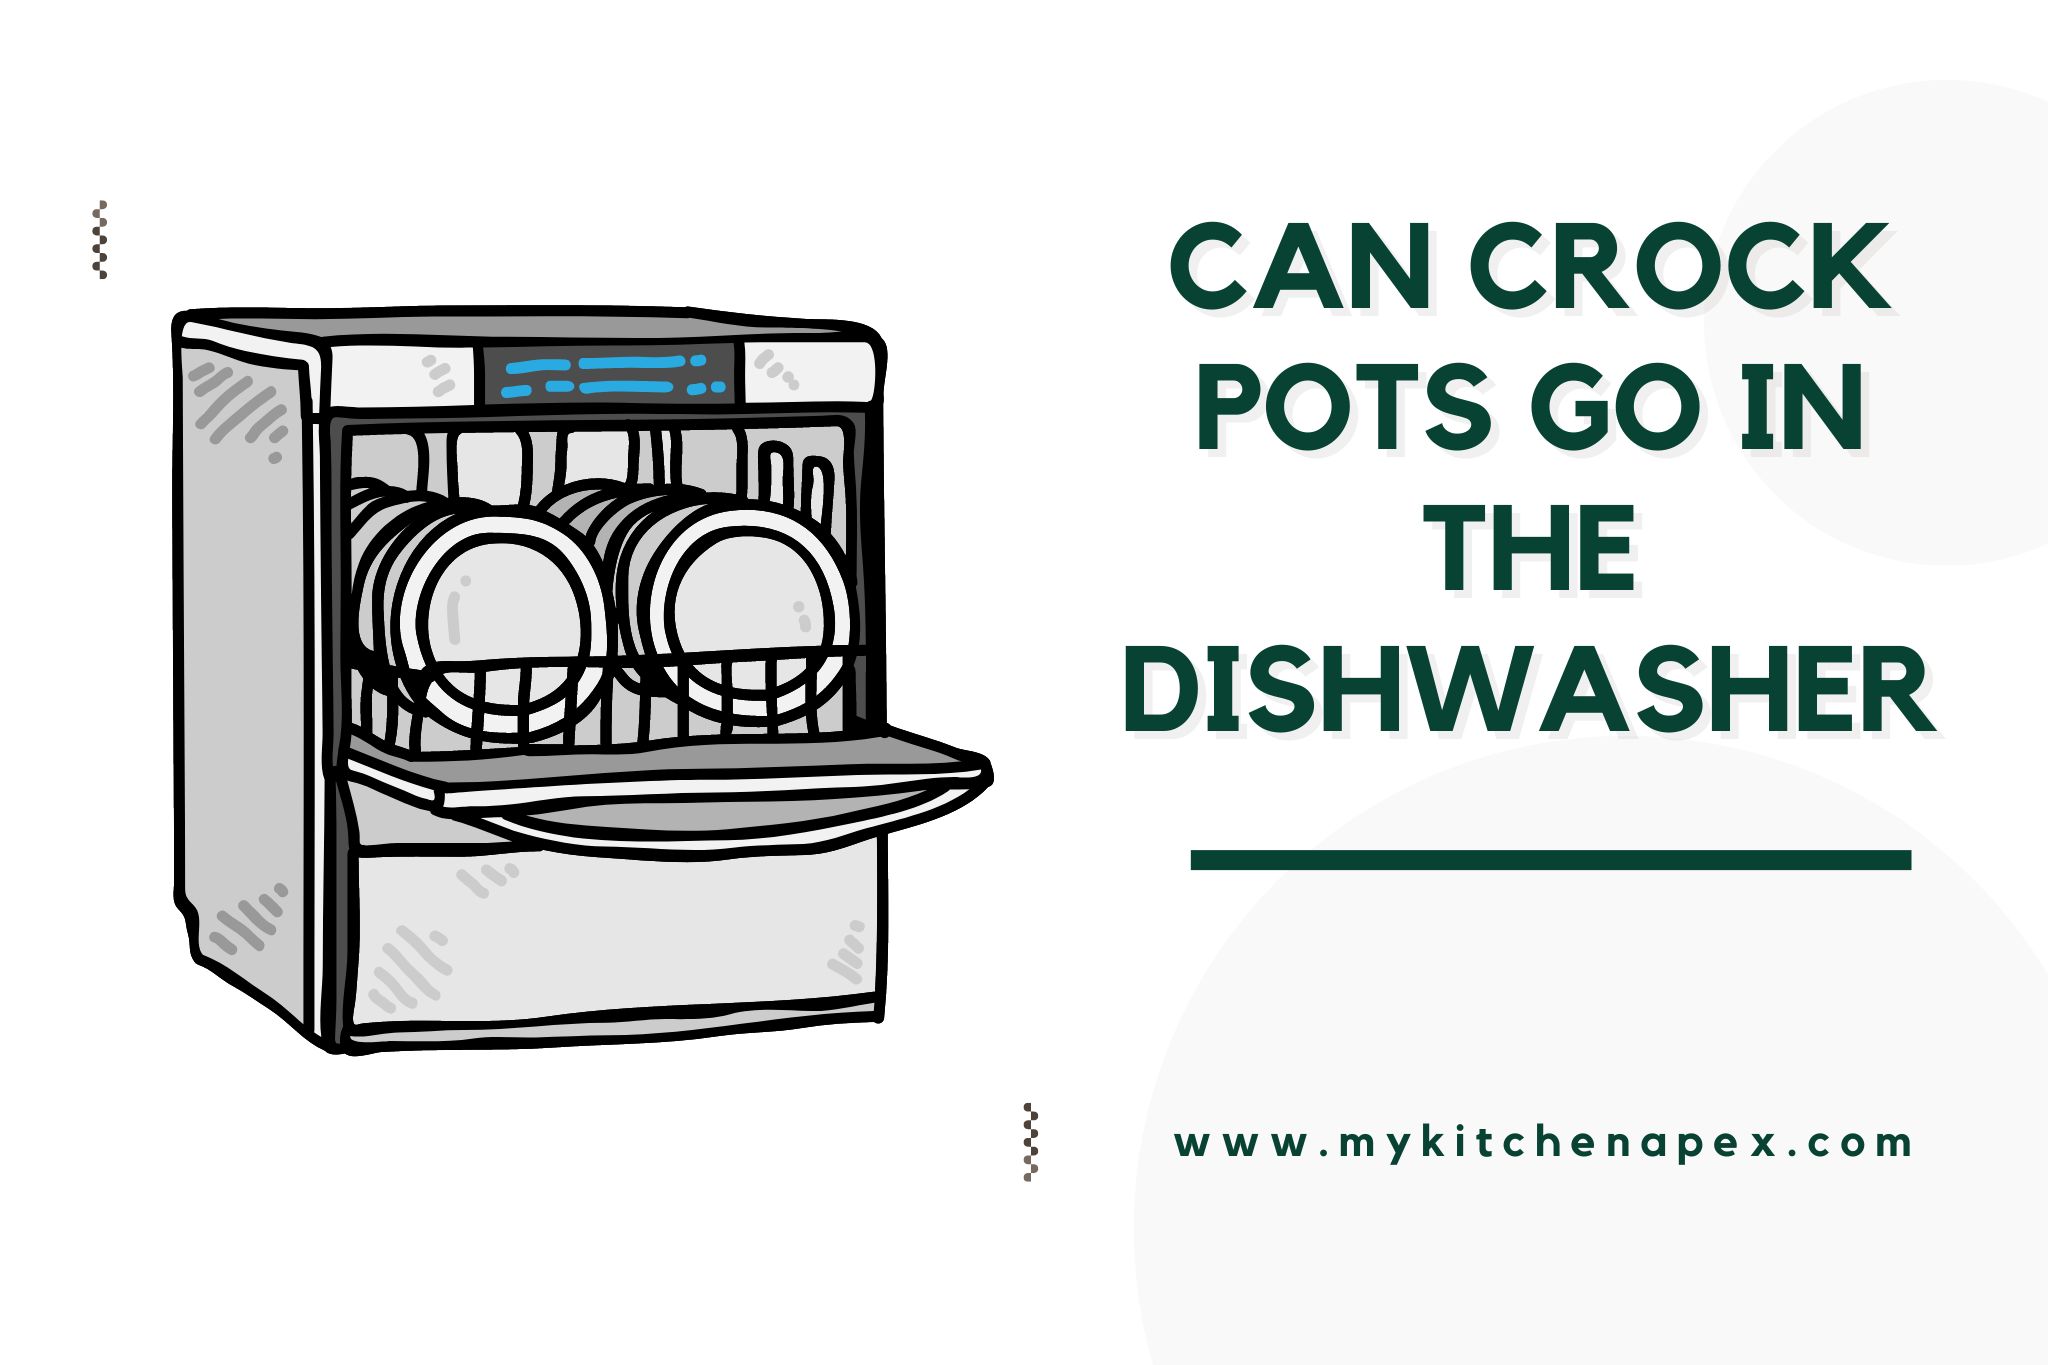 can crock pots go in the dishwasher